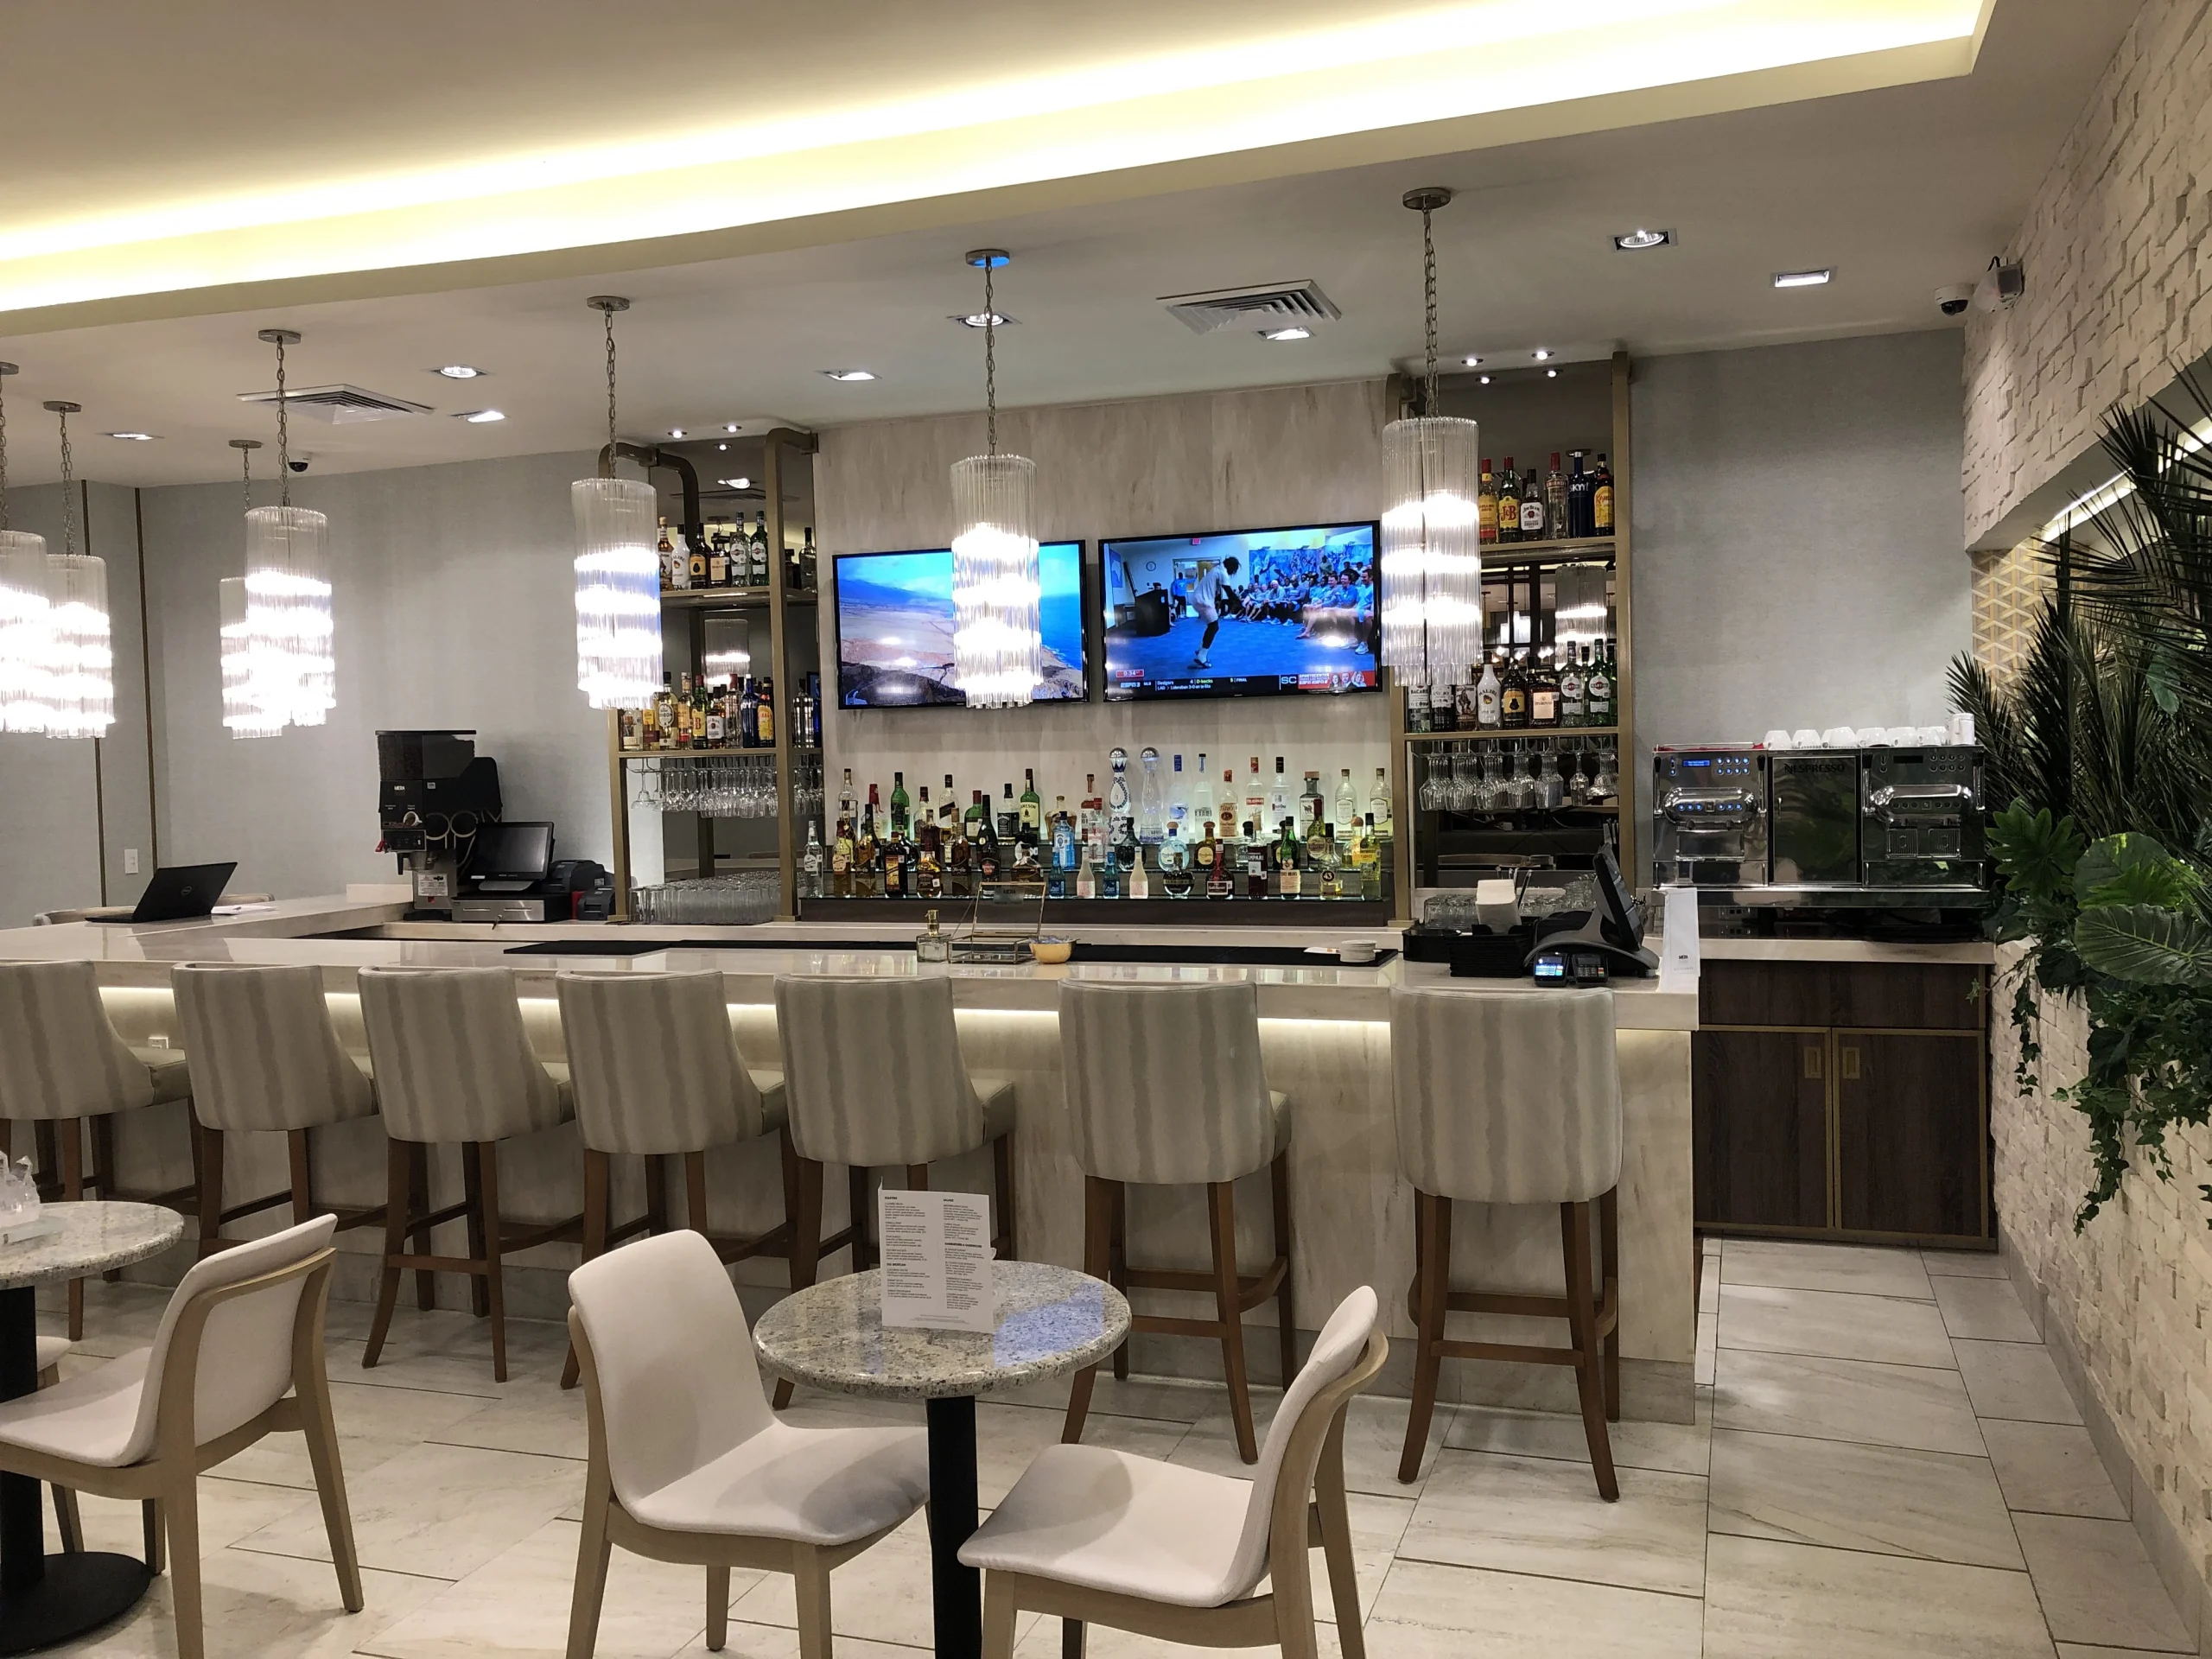 Stuck At CUN Airport For Several Hours Before Your Flight? Check Out The MERA Business Lounge!